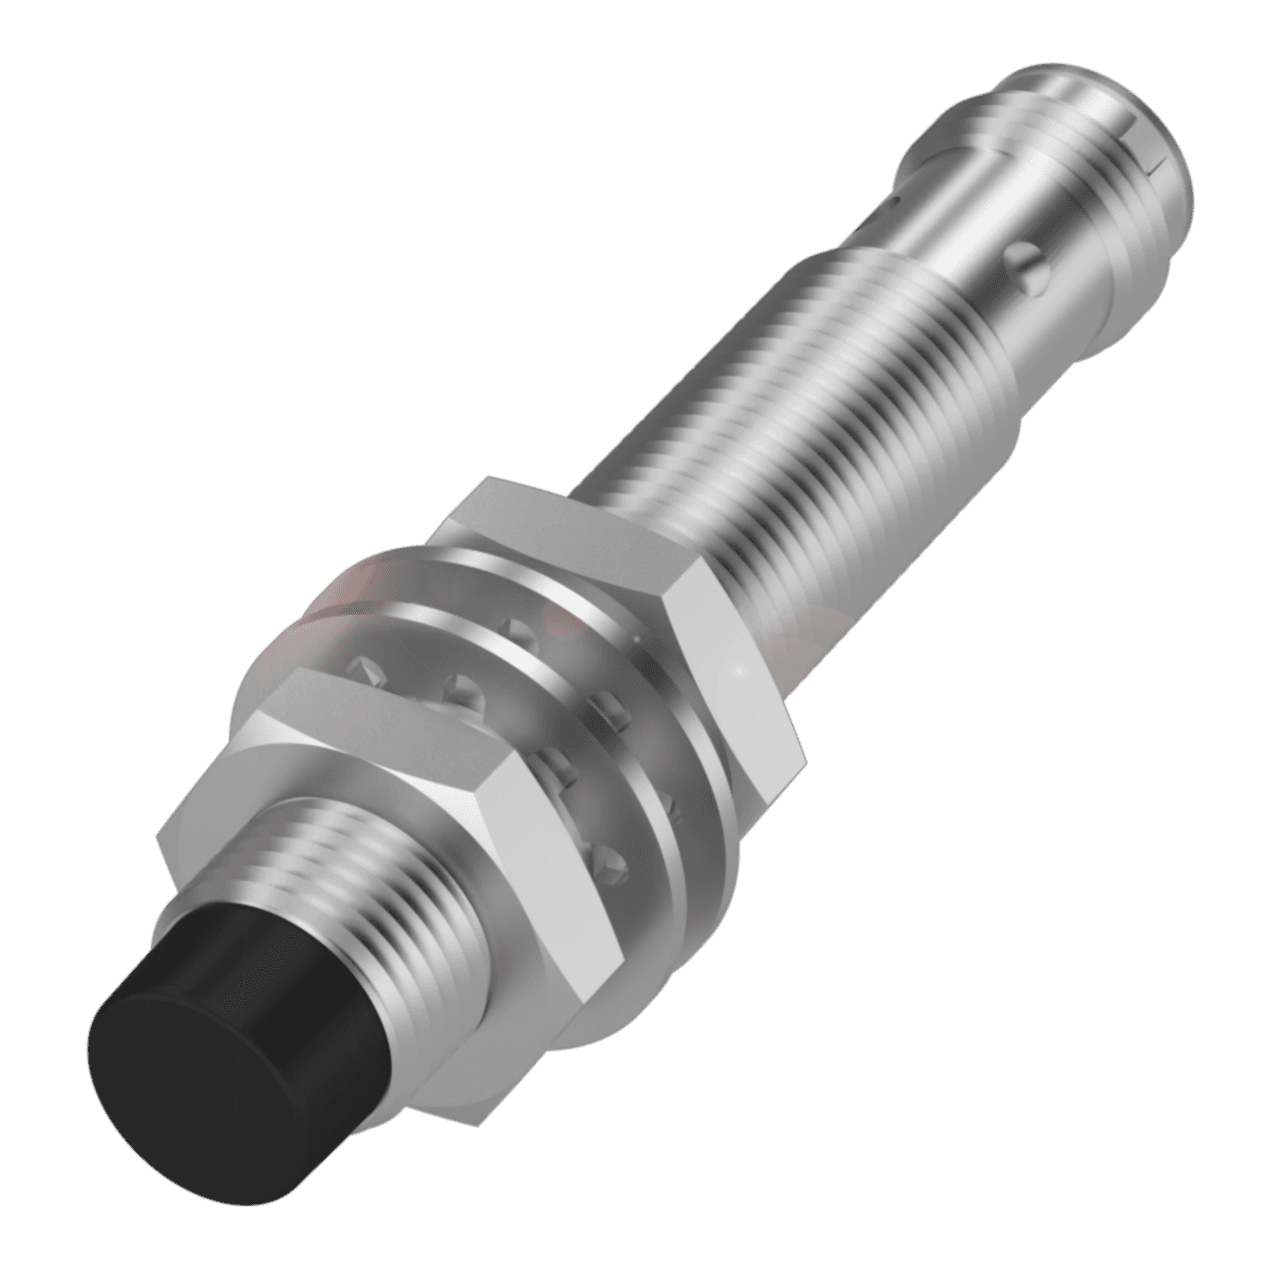 Balluff BES01H6 Inductive standard sensors with preferred type, Dimension: Ø 12 x 70 mm, Style: M12x1, Installation: non-flush, Range: 4 mm, Switching output: PNP Normally open (NO), Switching frequency: 2500 Hz, Housing material: Stainless steel